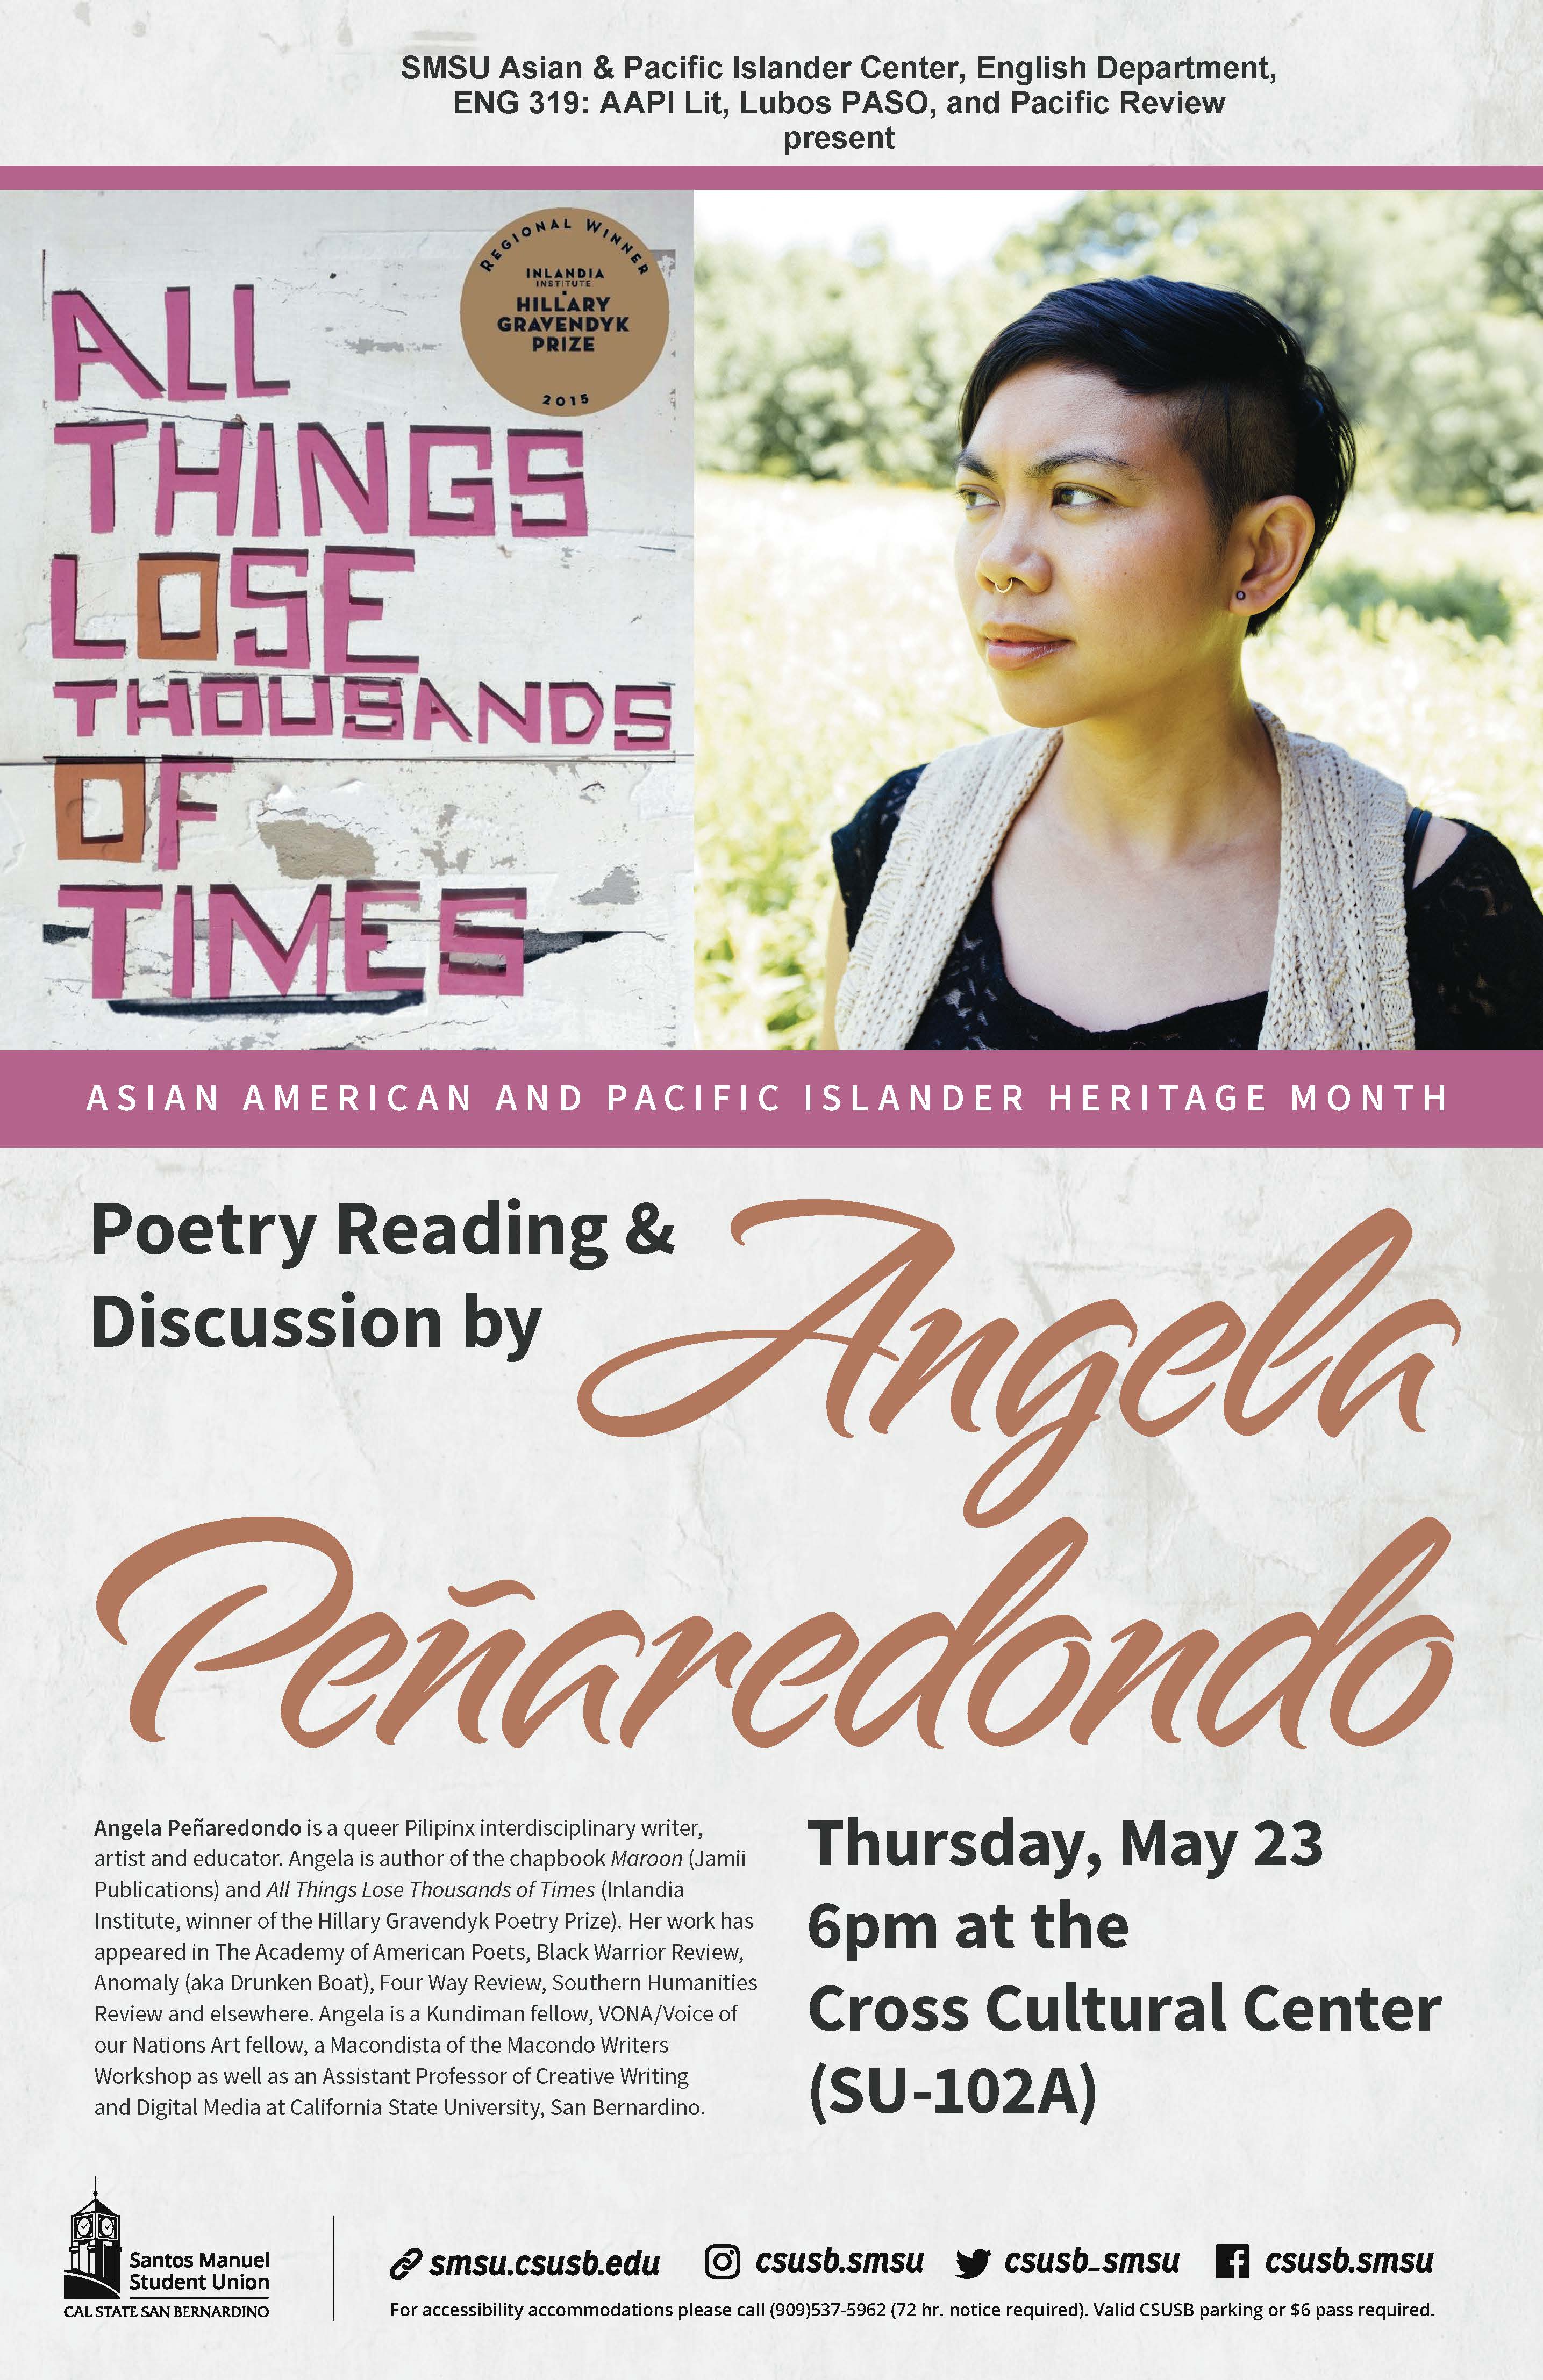 Poetry reading and discussion with Angela Peñaredondo, writer, artist and CSUSB professor